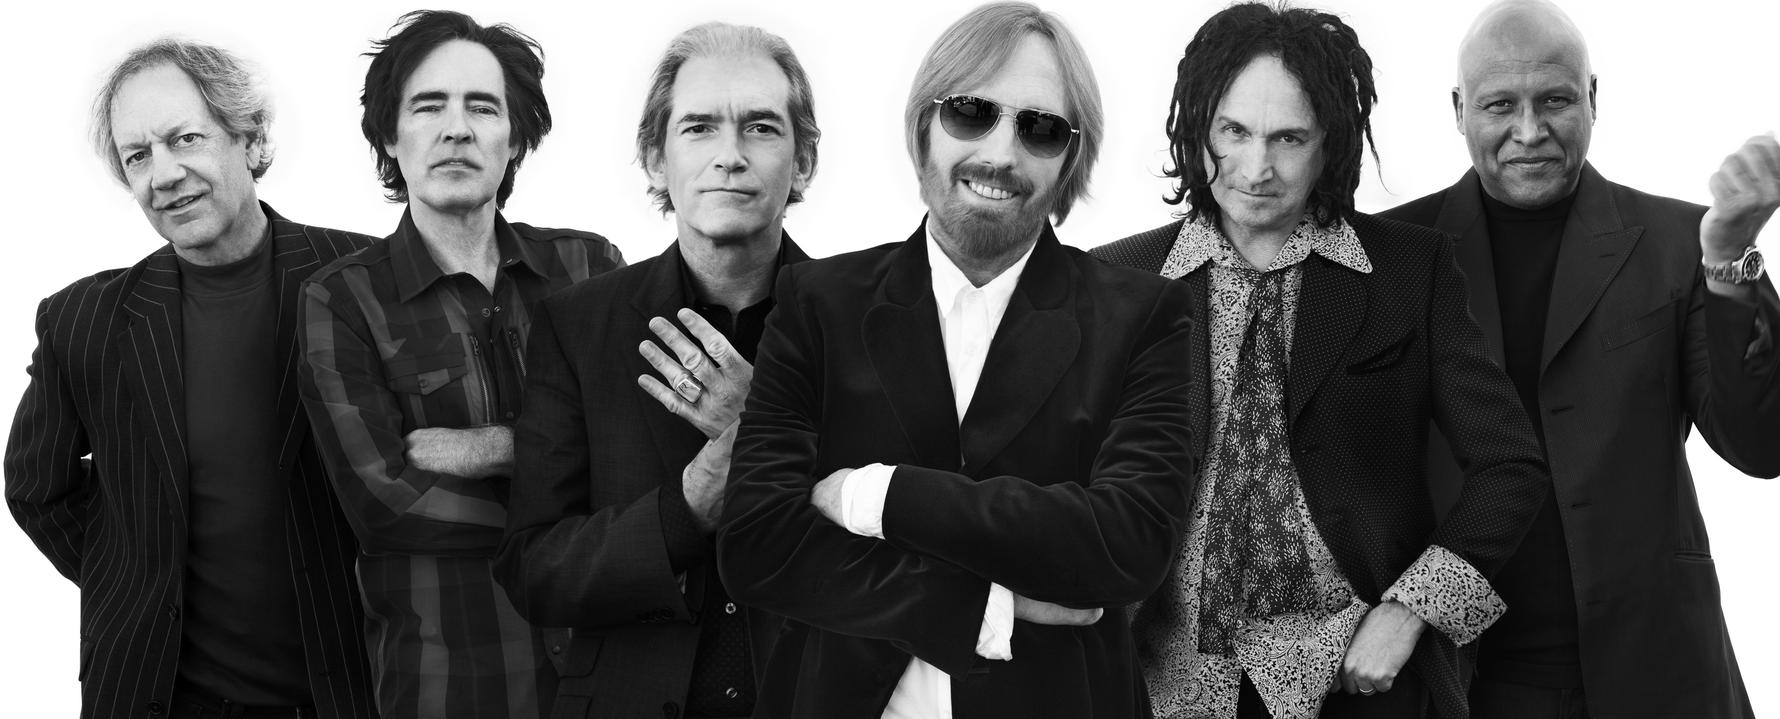 Promotional photograph of Tom Petty and the Heartbreakers.